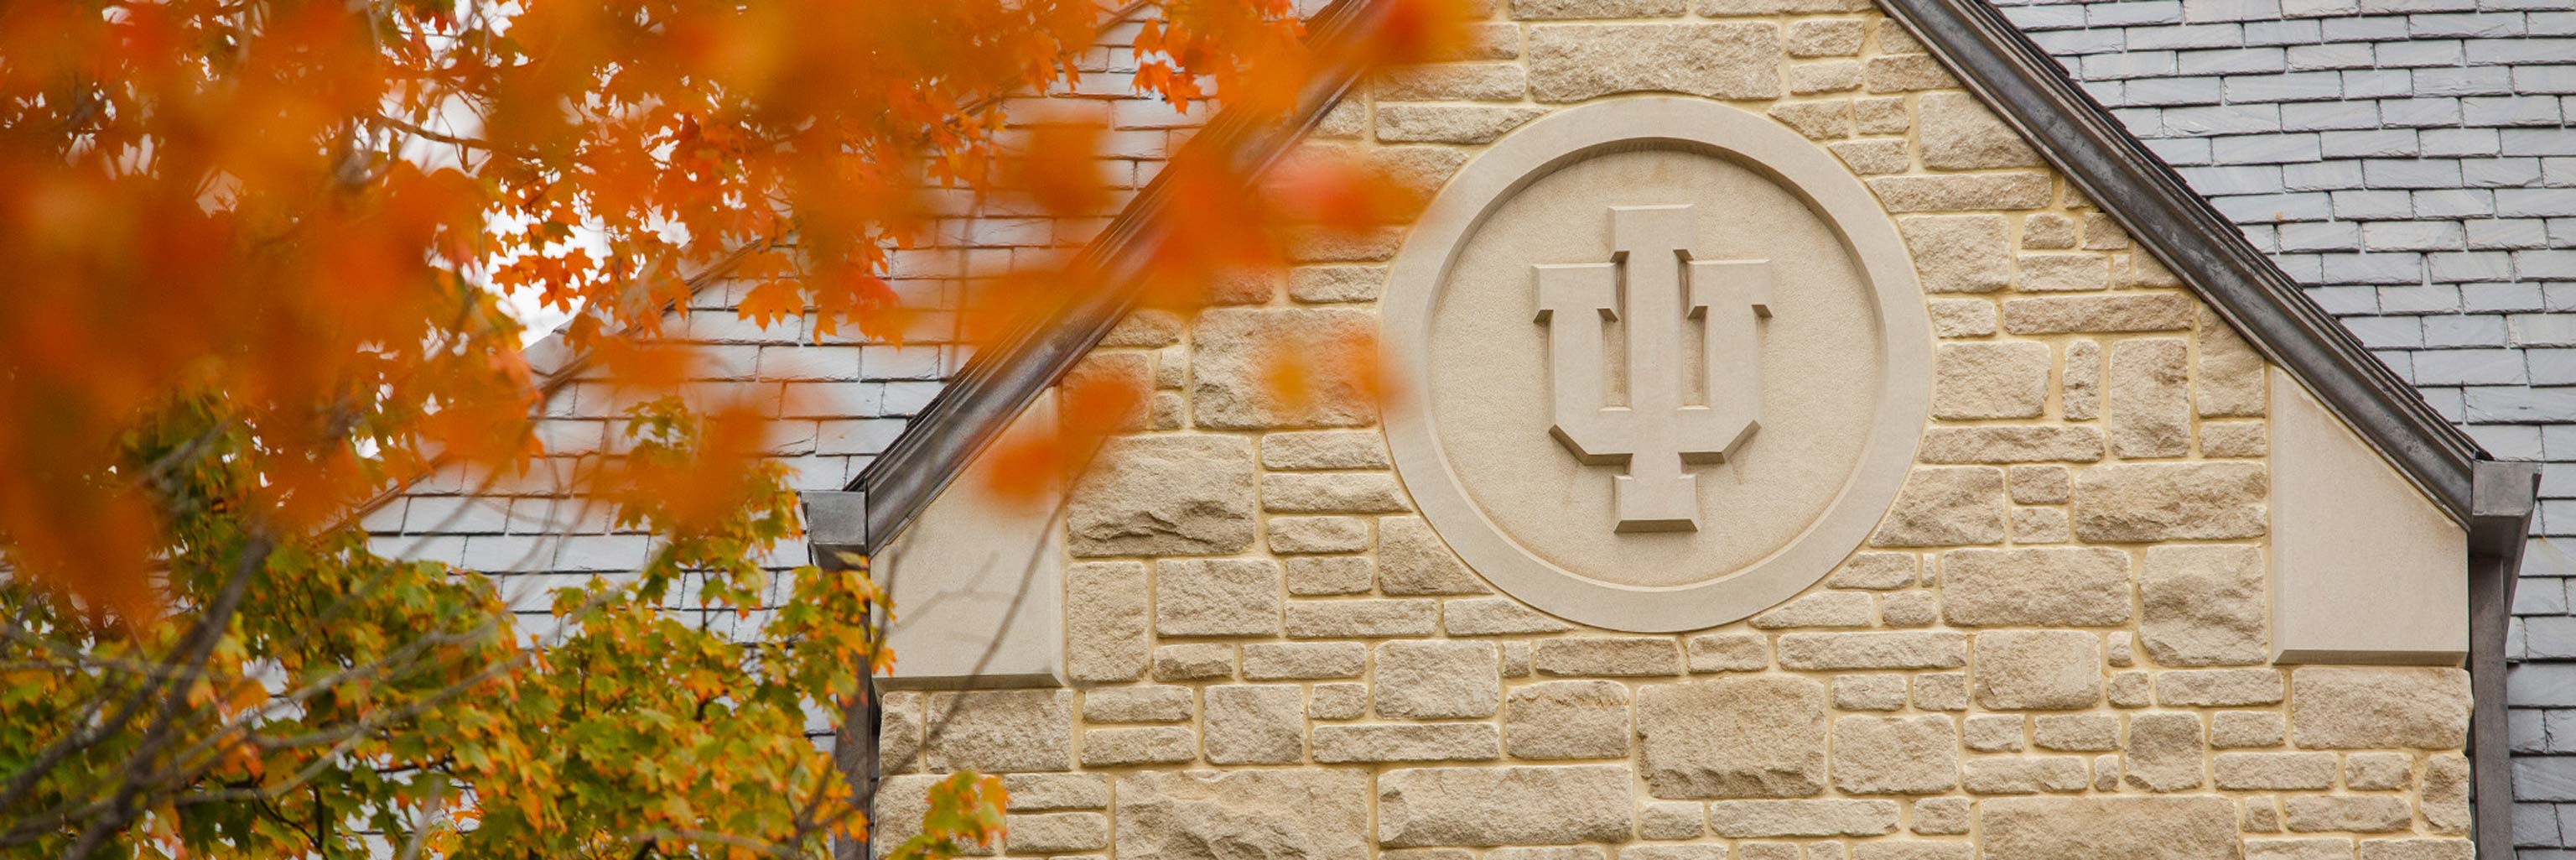 Indiana University seal carved into the side of a building